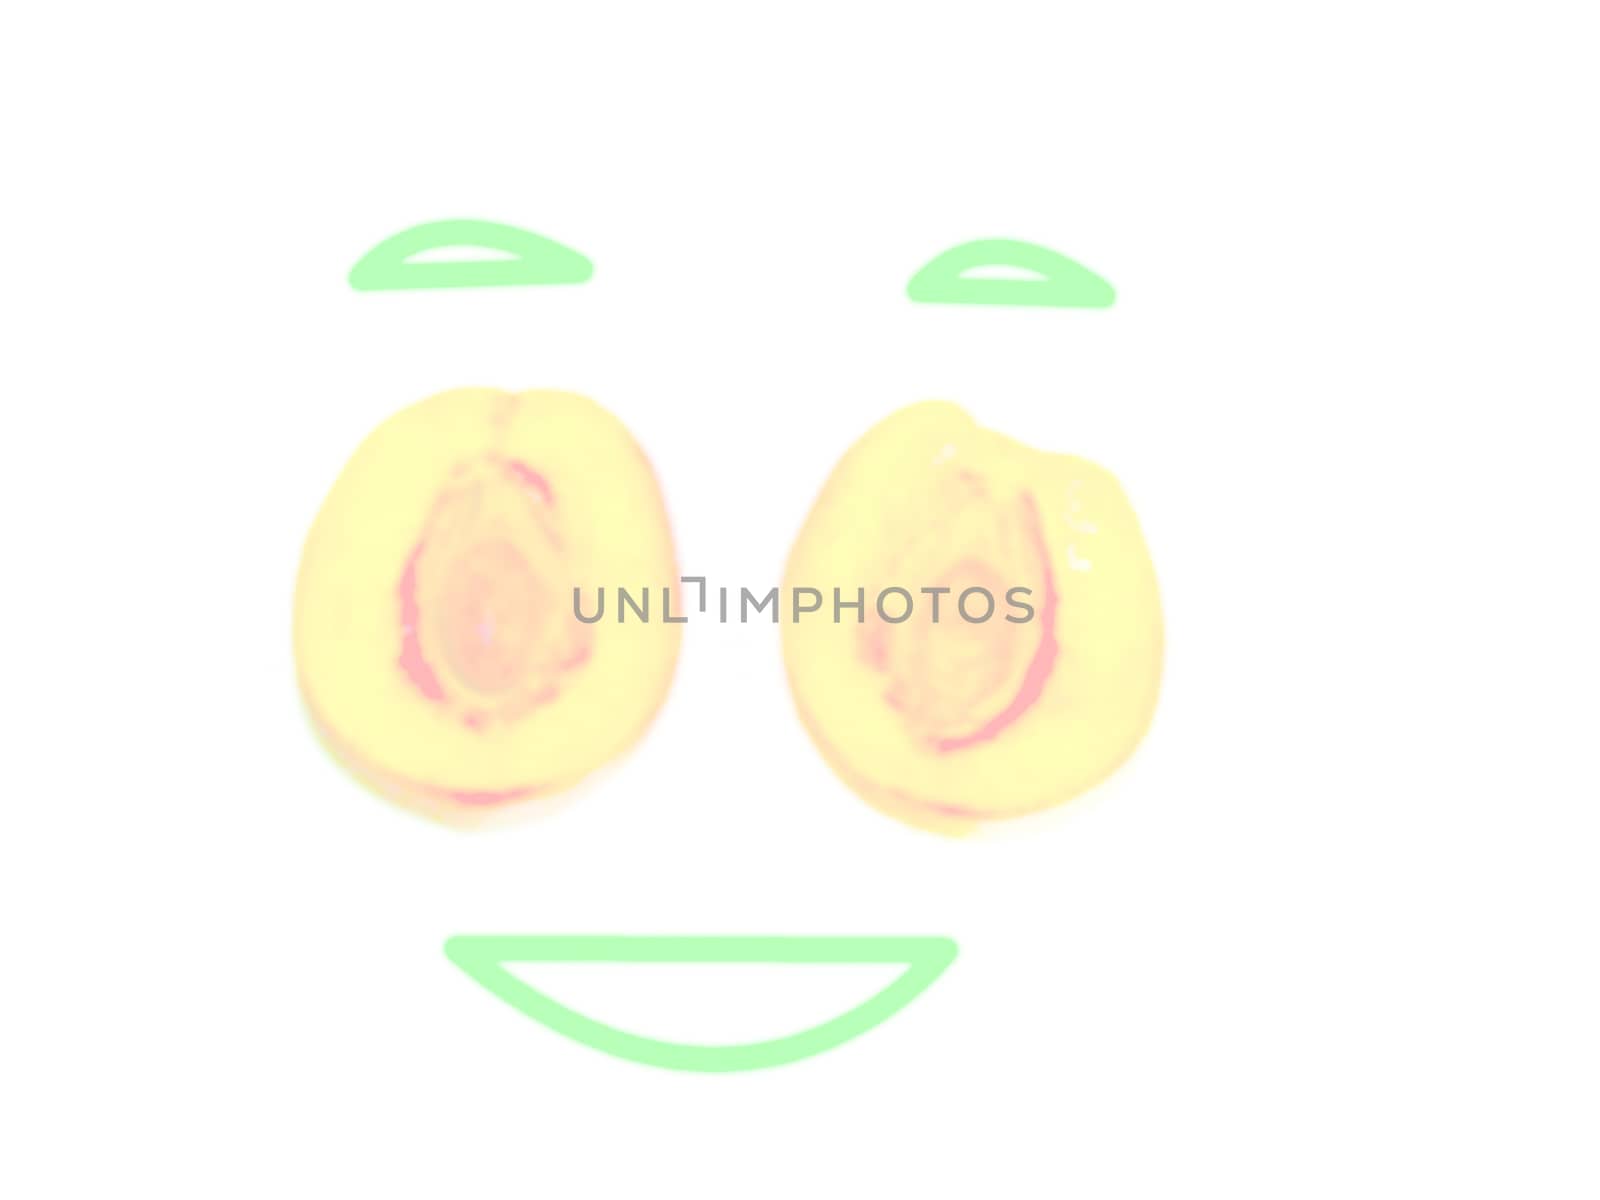 concept one nectarine divided into two halves toned and blurred throughout the frame on a white background